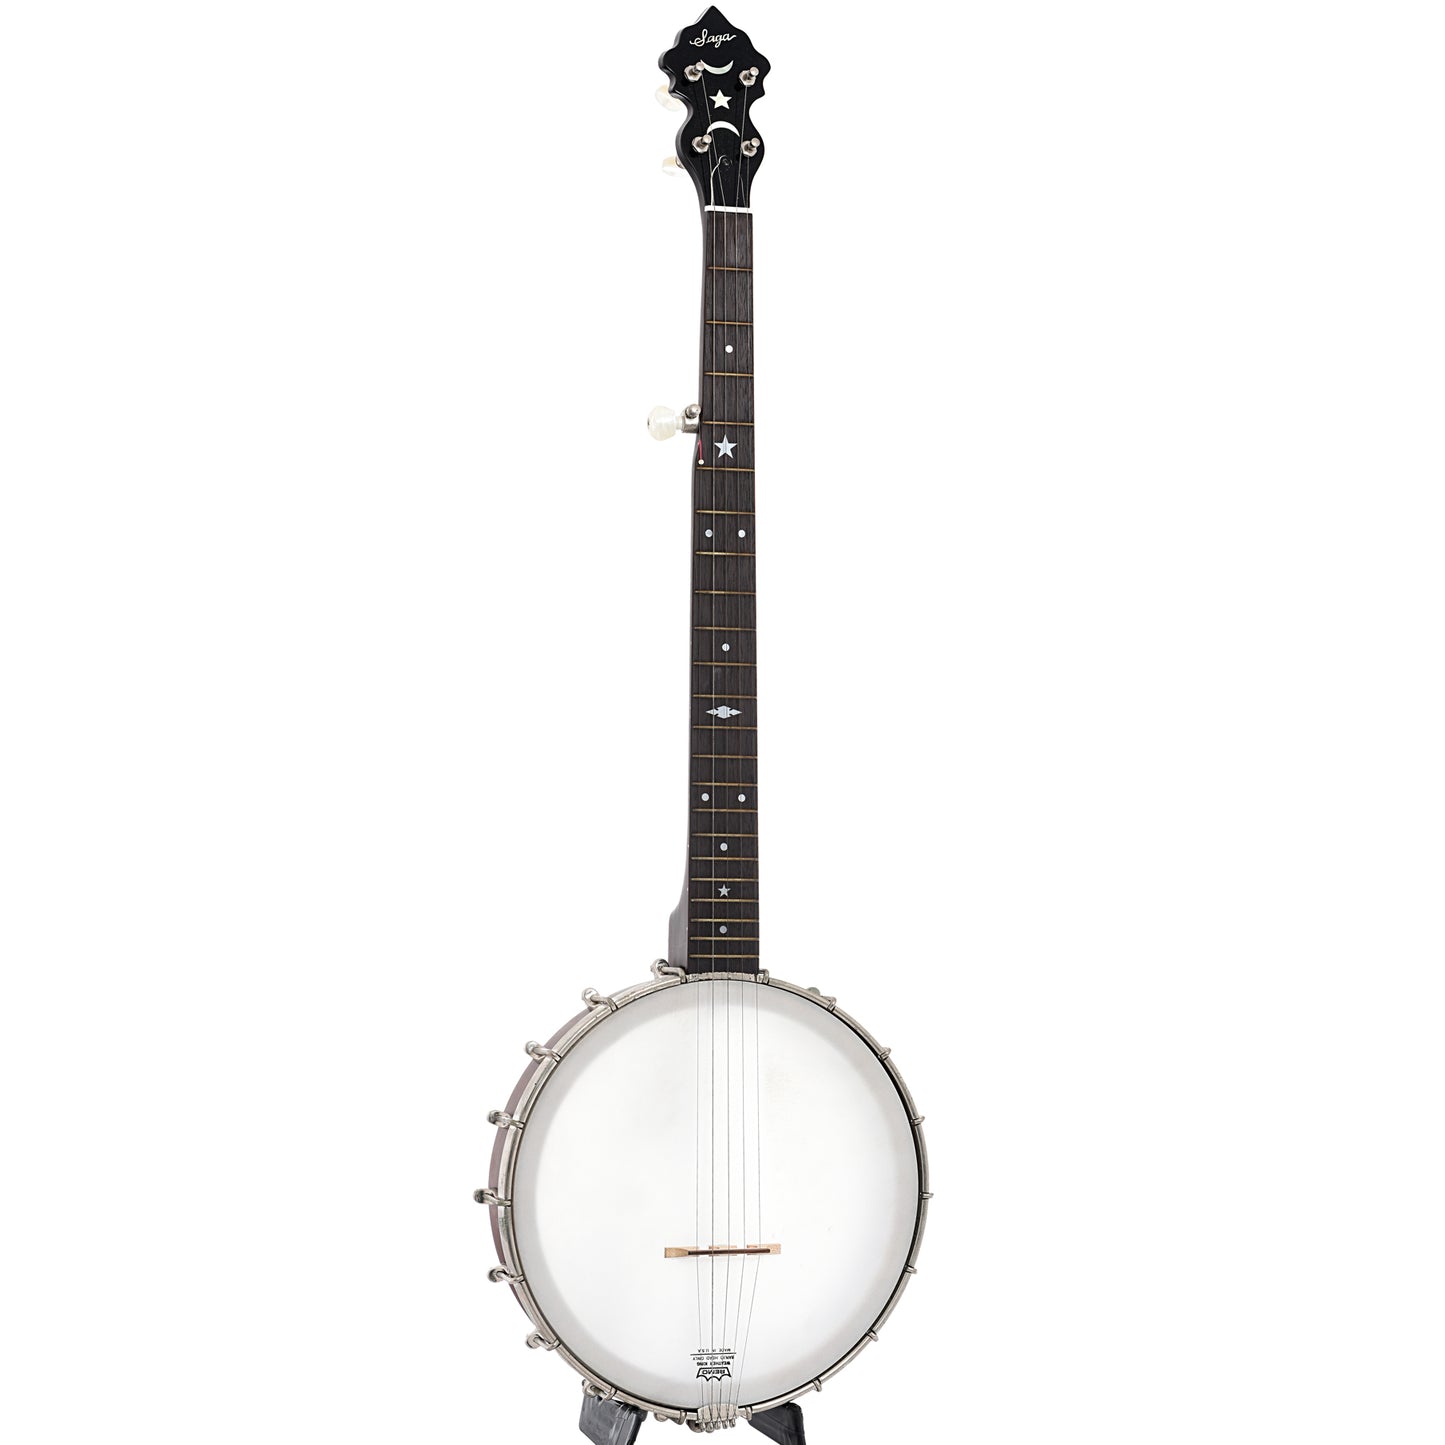 Full front and side of Saga SS10 Open Back Banjo